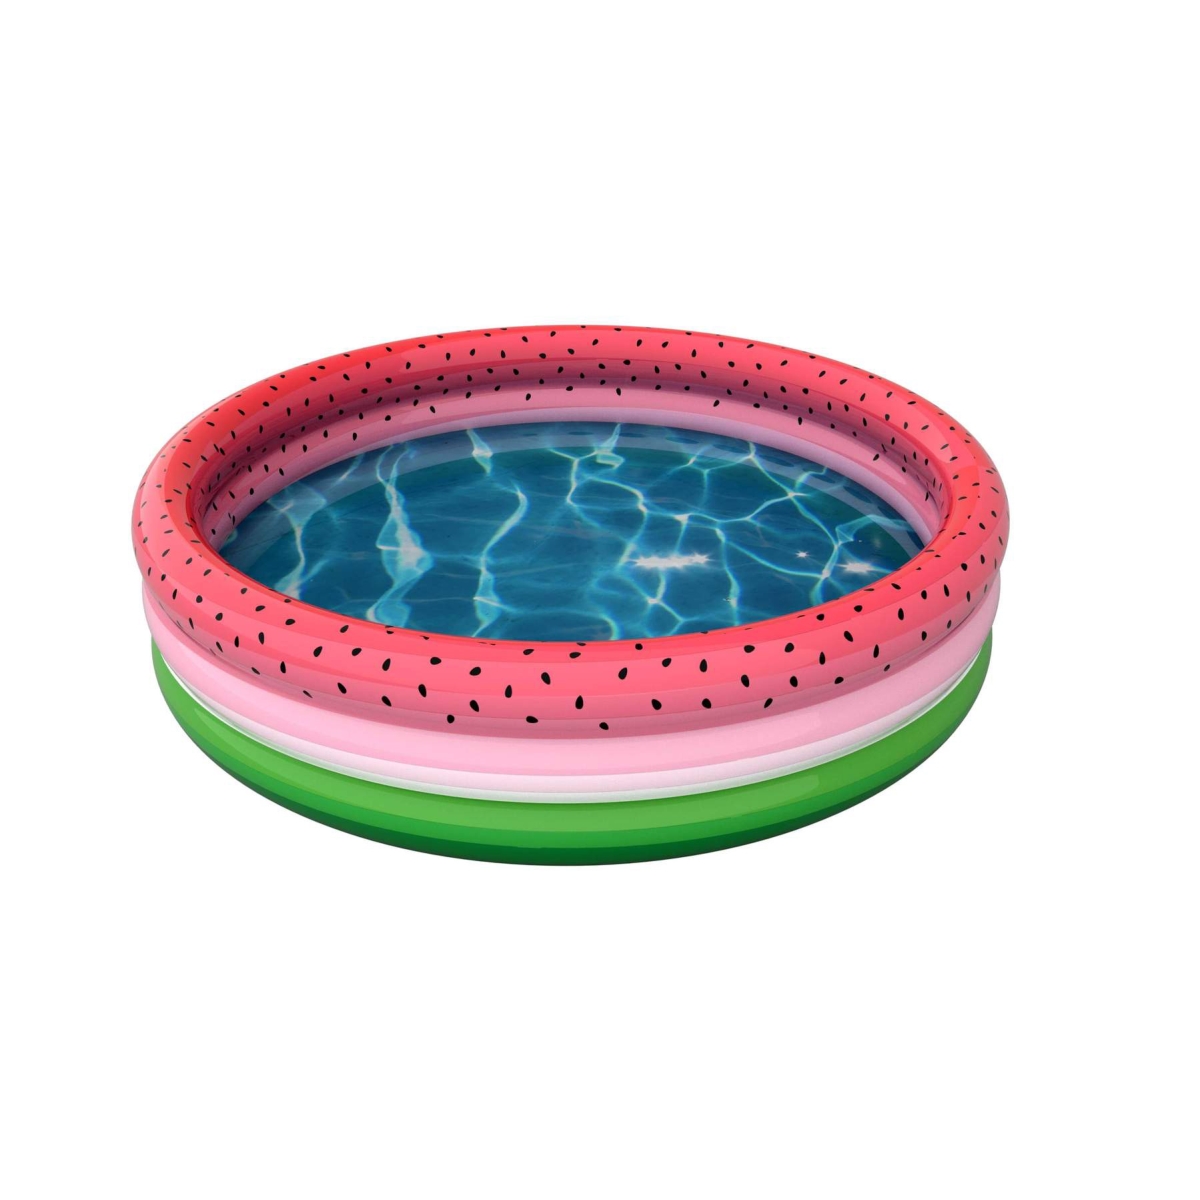 Picture of Pool Candy PC6060WM-F 60 x 60 x 15 in. Inflatable Sunning Pool Featuring a Watermelon